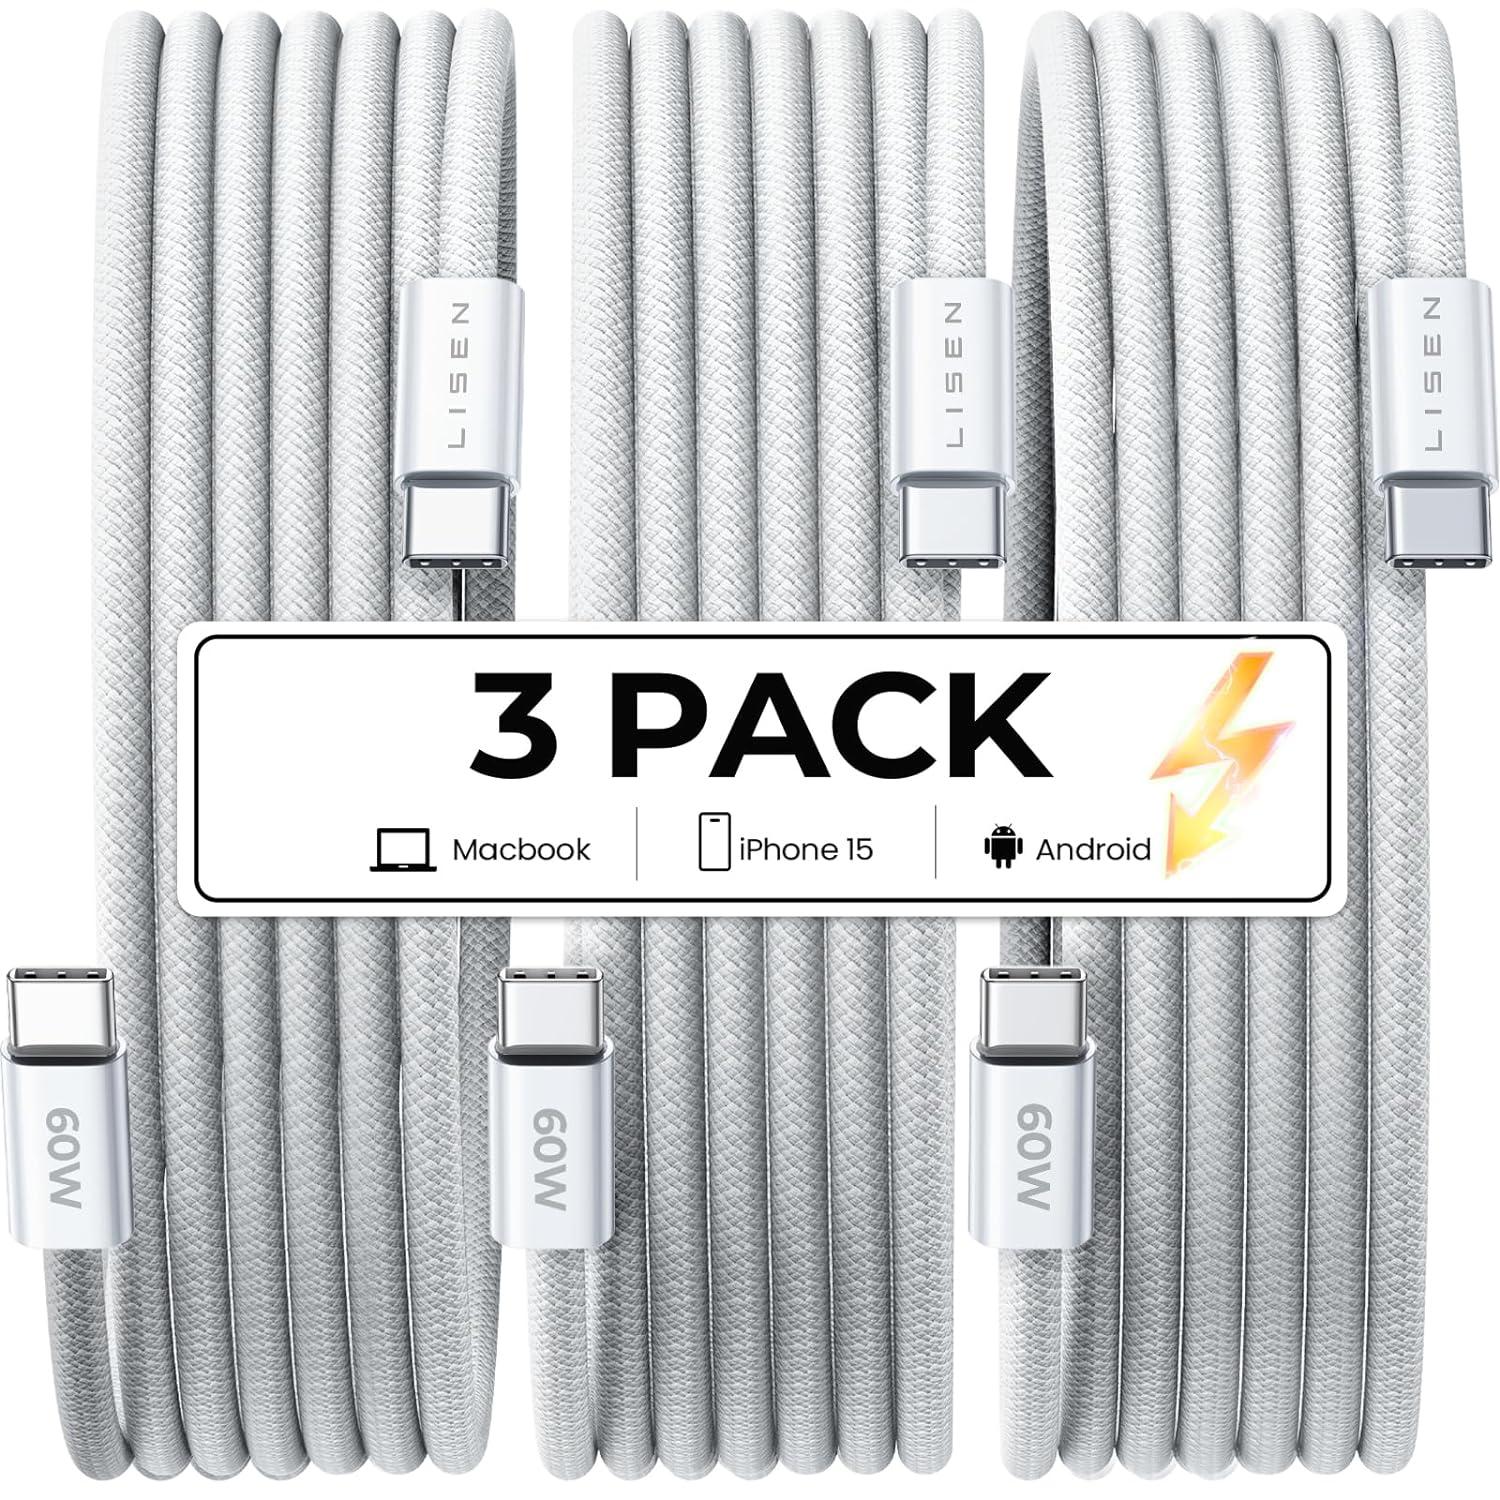 USB-C Charging Cables 3 Pack for $4.76